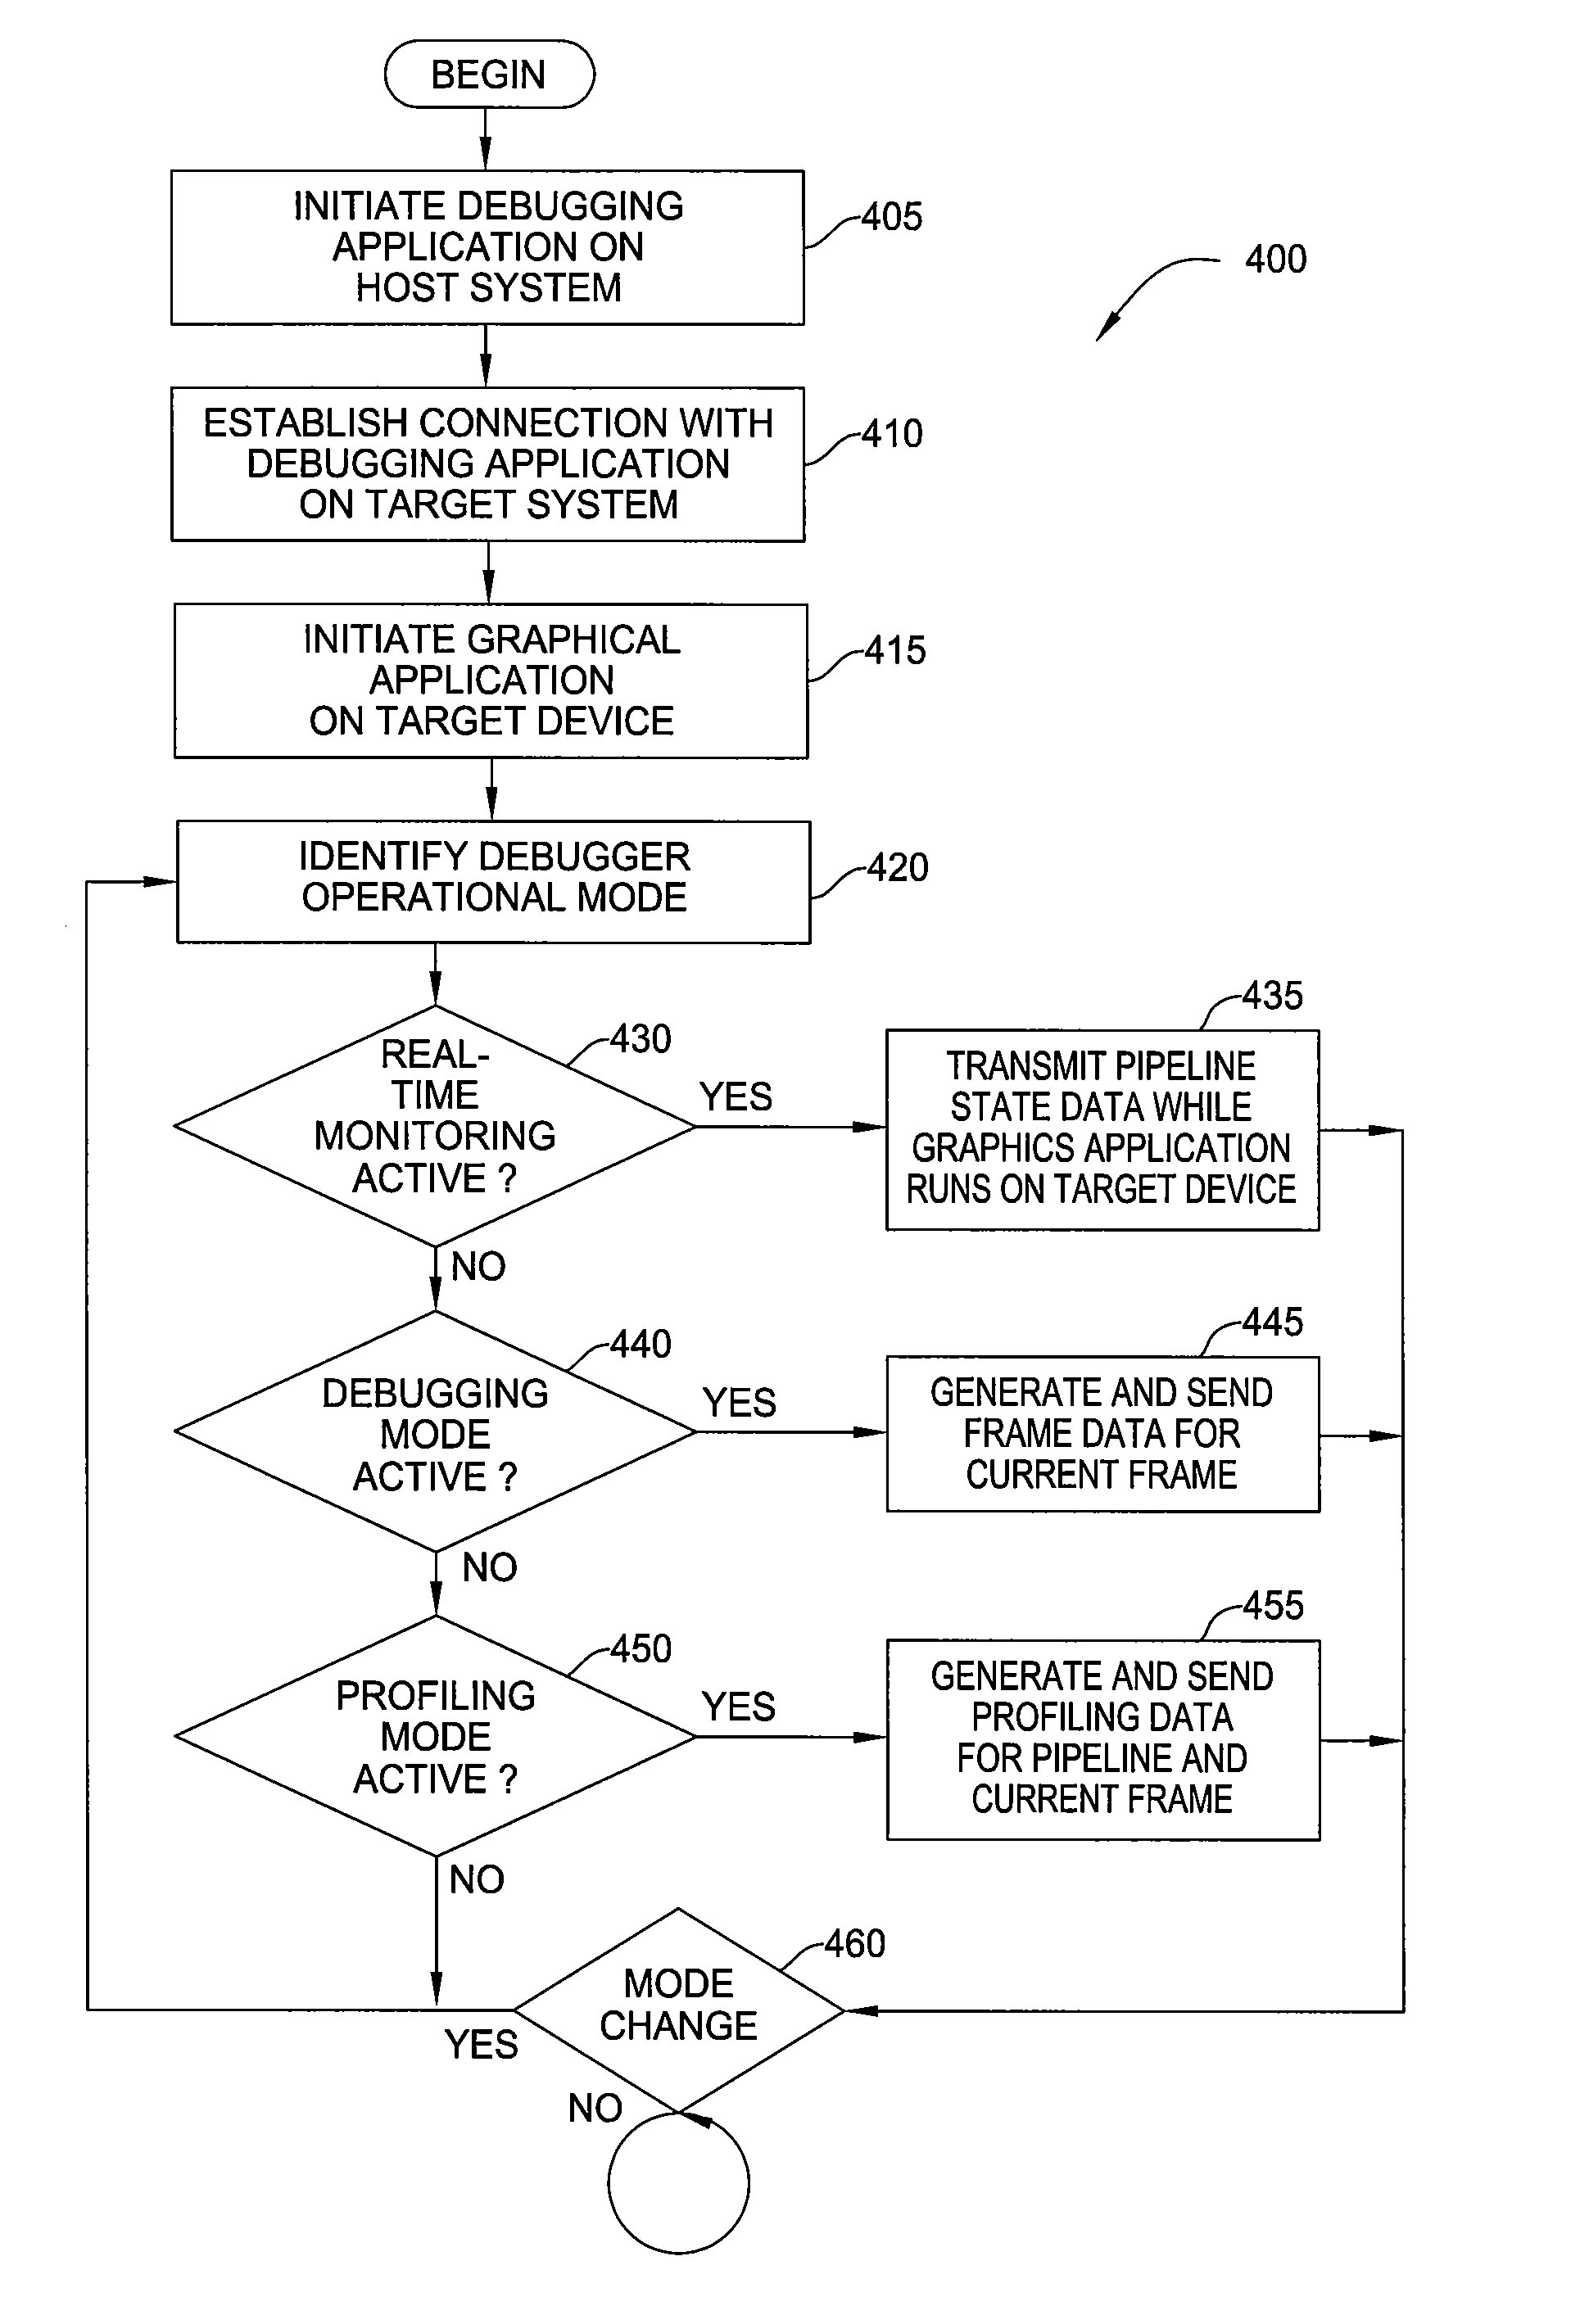 Serialization of function calls to a graphics API for debugging a remote device